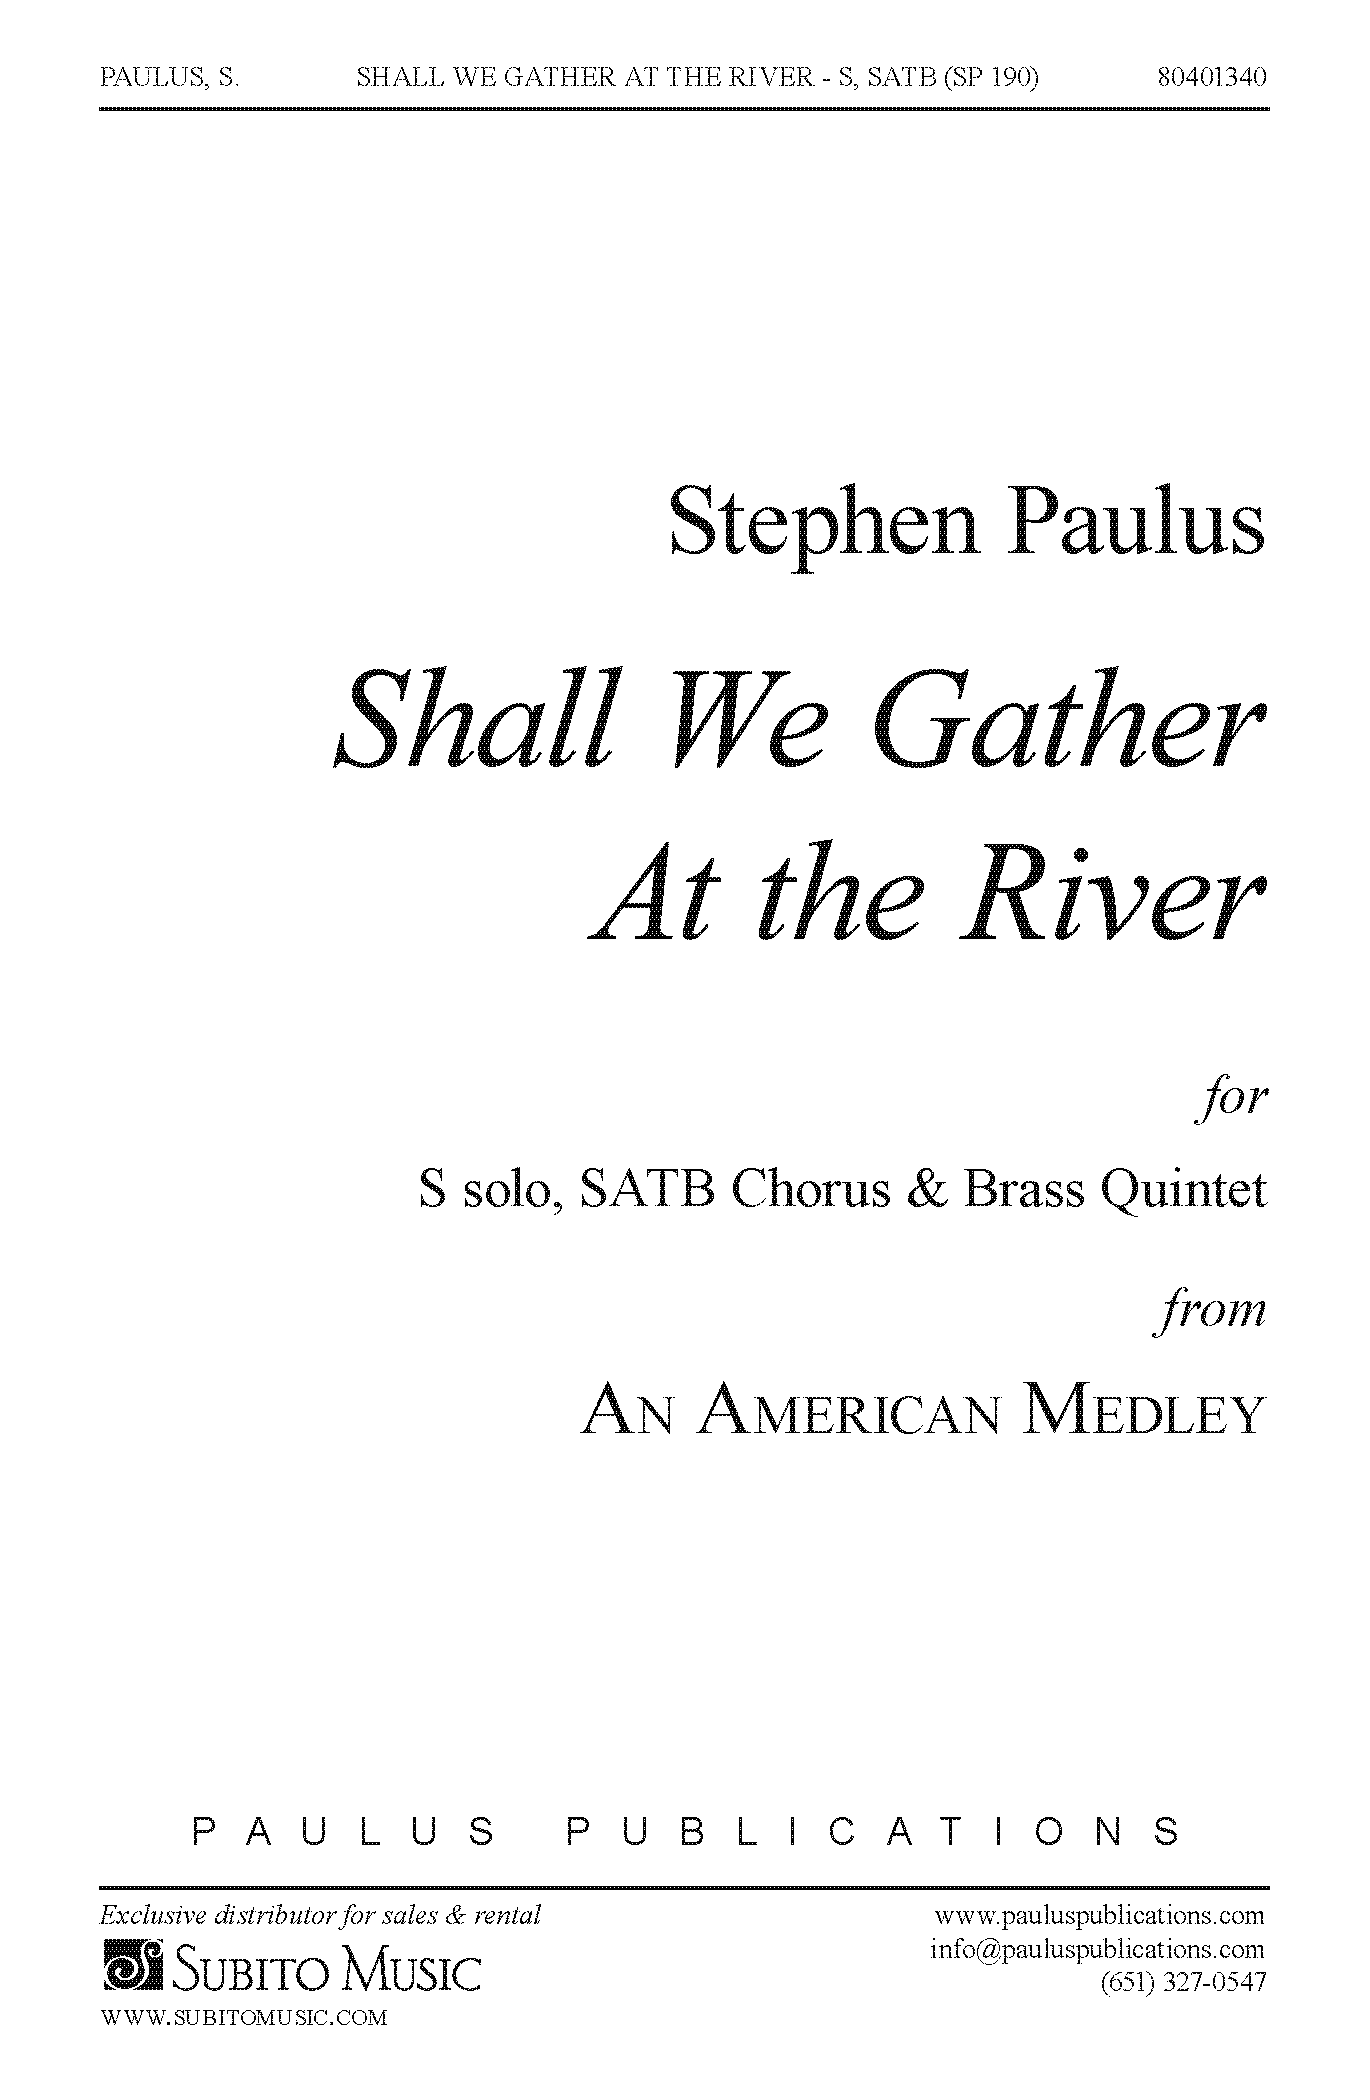 Shall We Gather at the River for SATB Chorus & Brass Quintet